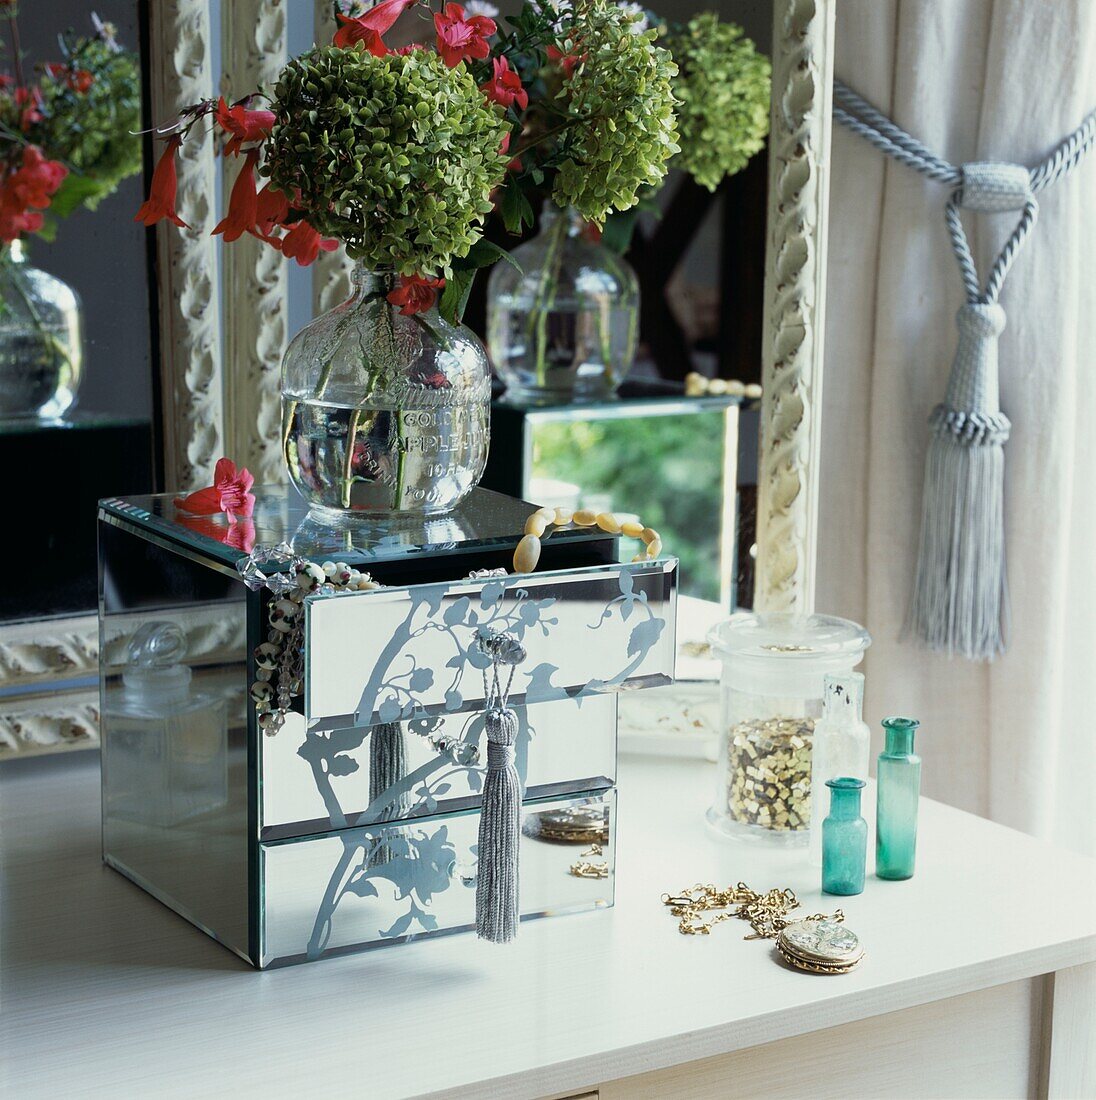 Mirrored jewellery box on a dressing table